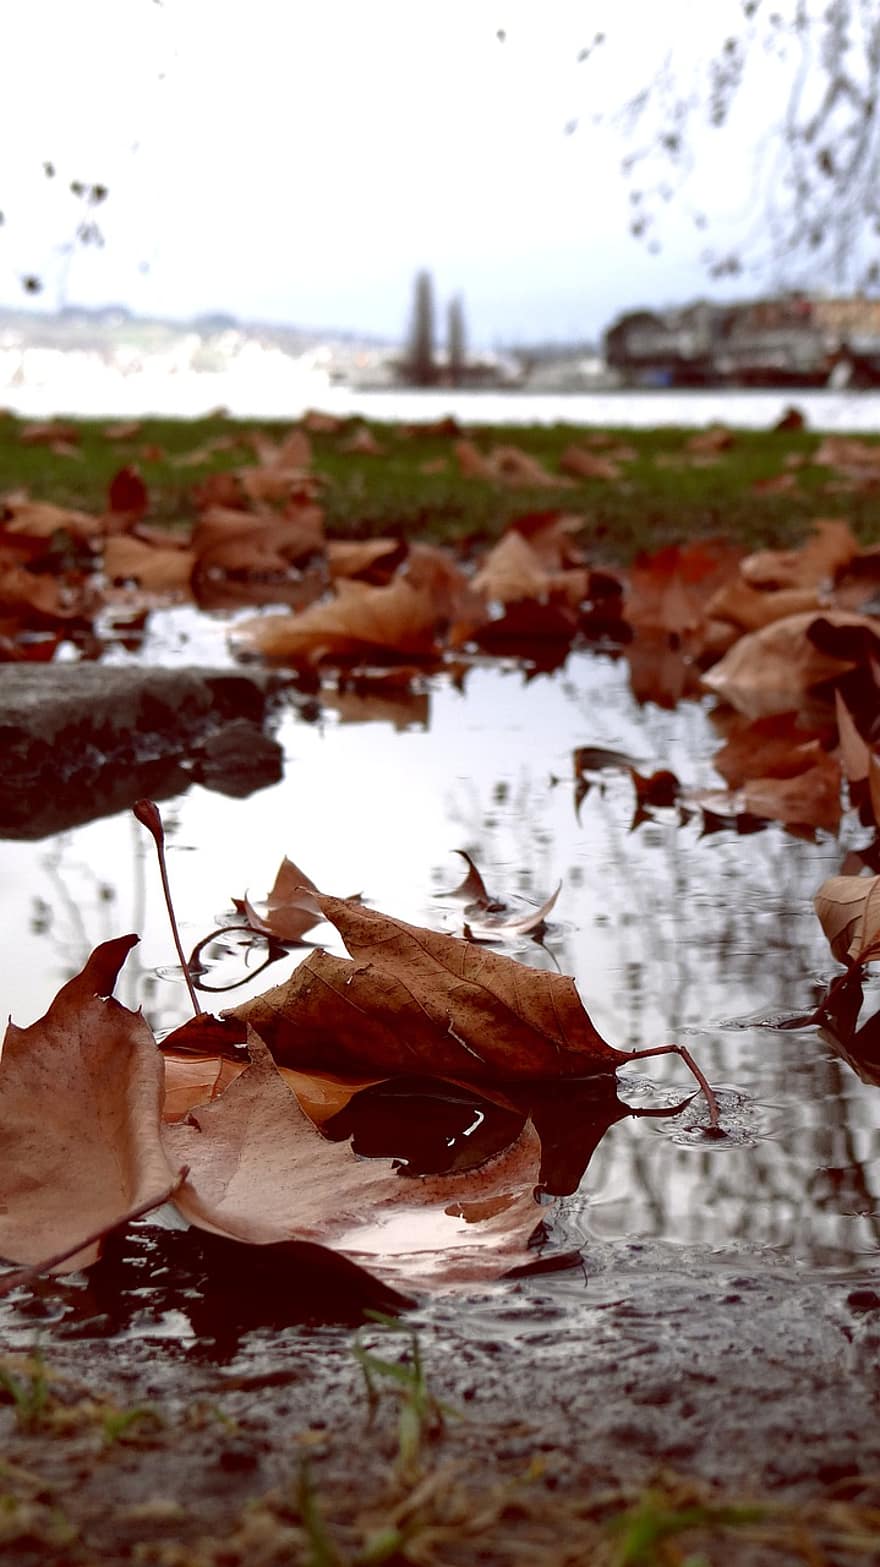 Leaves, Puddle, Wet, Fallen Leaves, Dry Leaves, Rain, Water, Autumn, Fall, Nature, Day